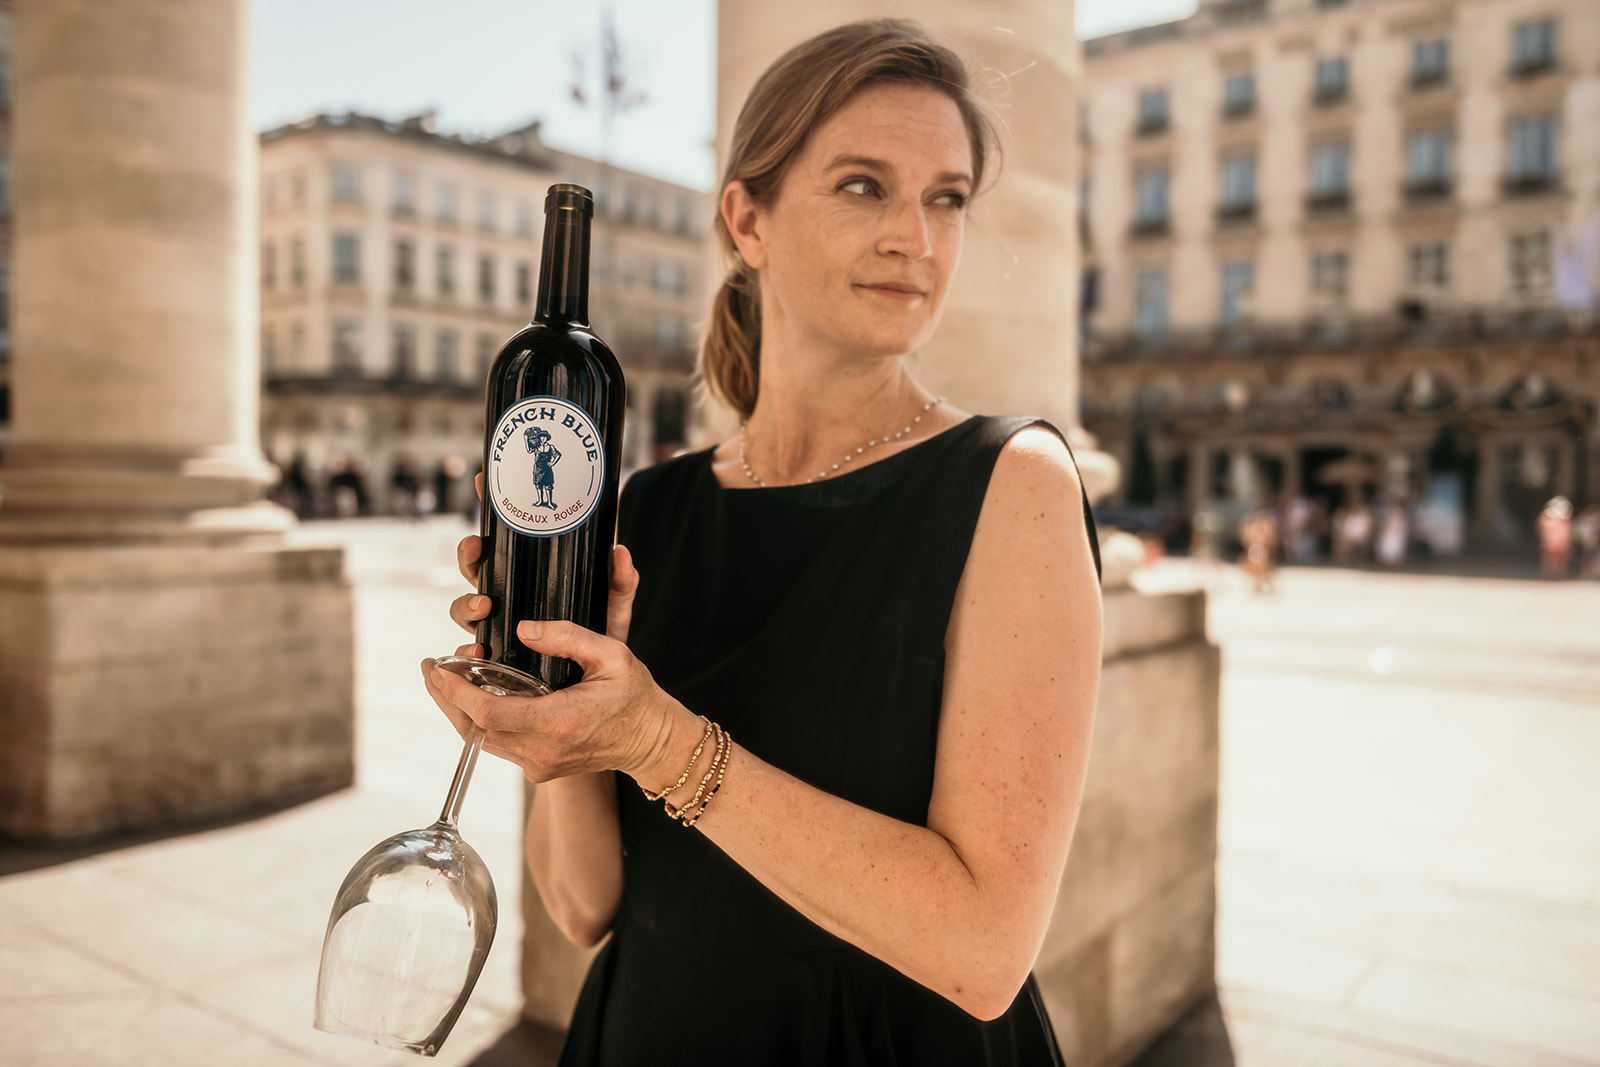 French Blue winemaker Stephanie Rivin works with local growers in the Entre-Deux-Mers and Périssac, on the Right Bank, the true experts of the soil and microclimate of their individual sites.